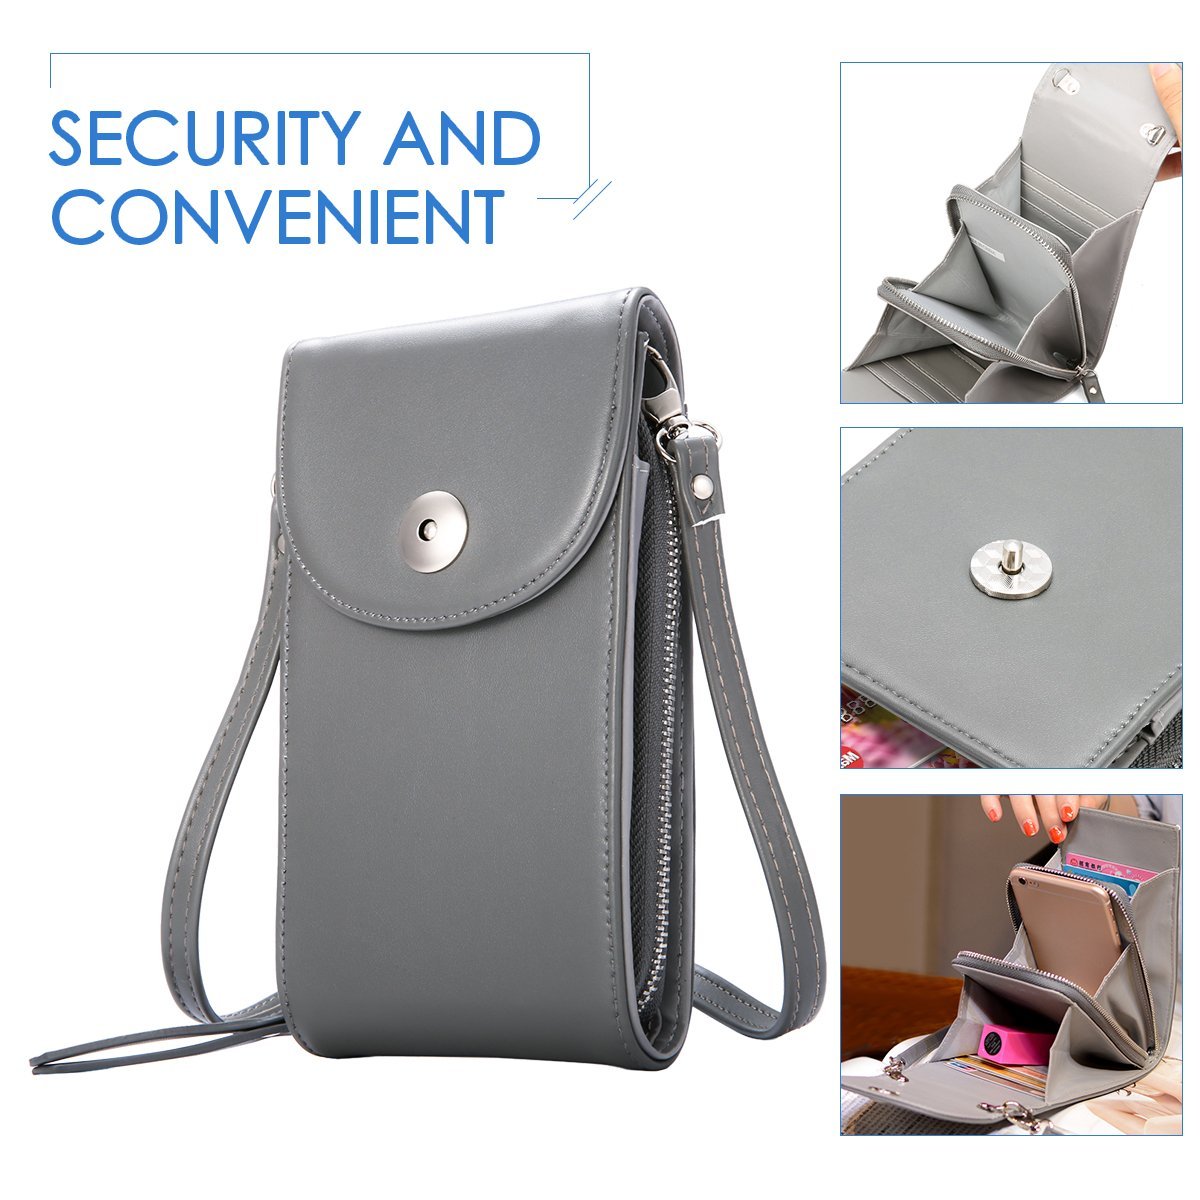 Multifunctional-Three-layer-Waist-Bag-Phone-Bag-For-47-55-Inch-Smart-Phone-for-iPhone-X-Xiaomi-Non-o-1633377-3